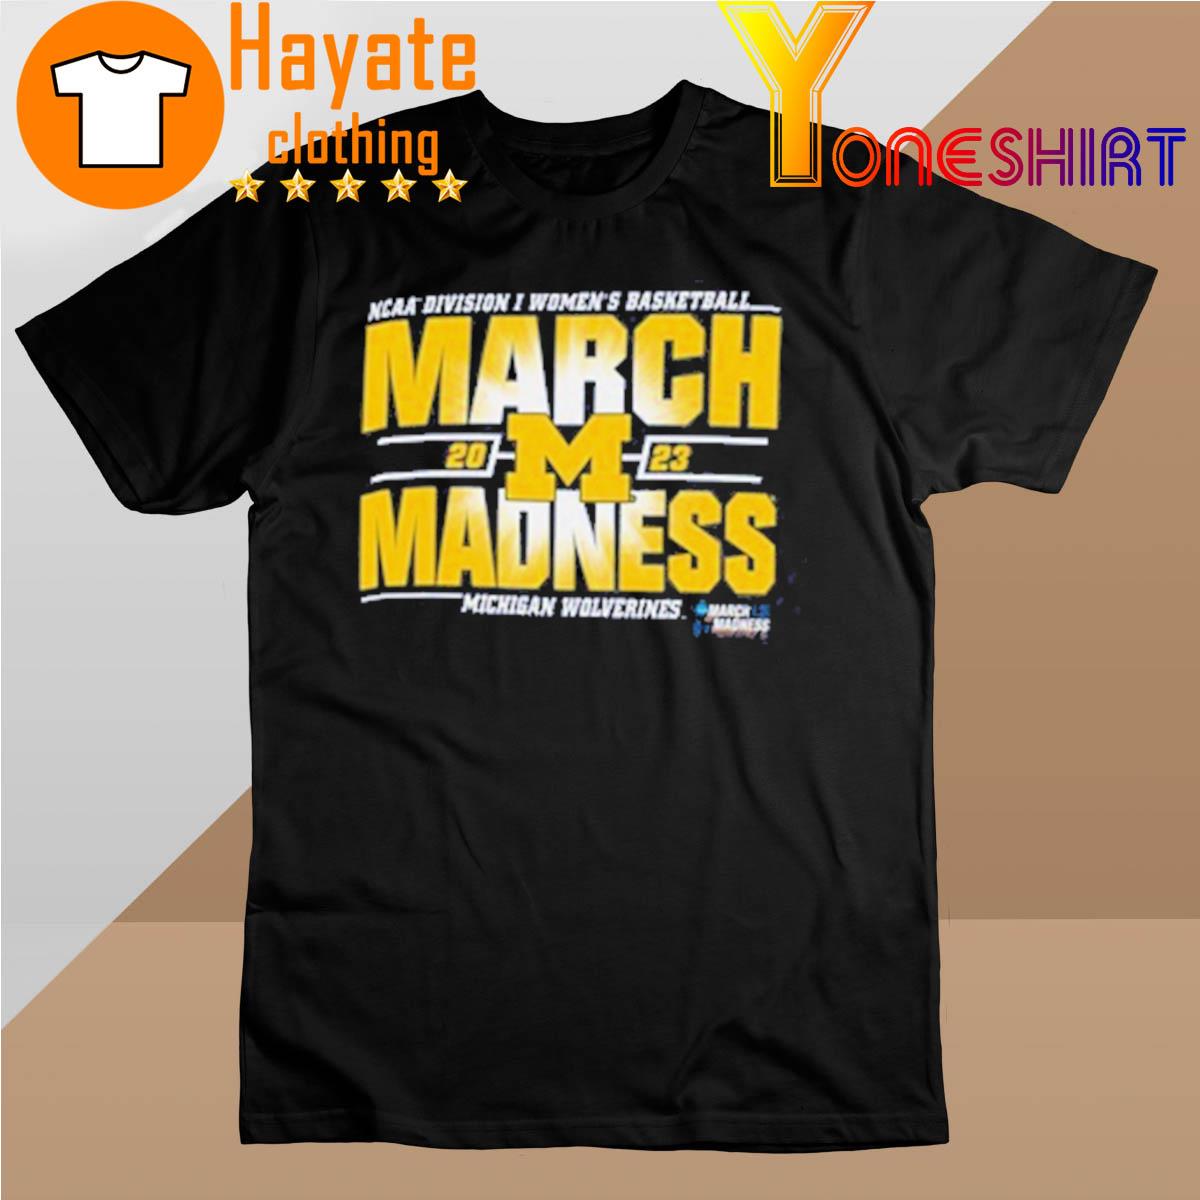 Official Michigan Wolverines Ncaa Division I Women's Basketball March Madness 2023 shirt